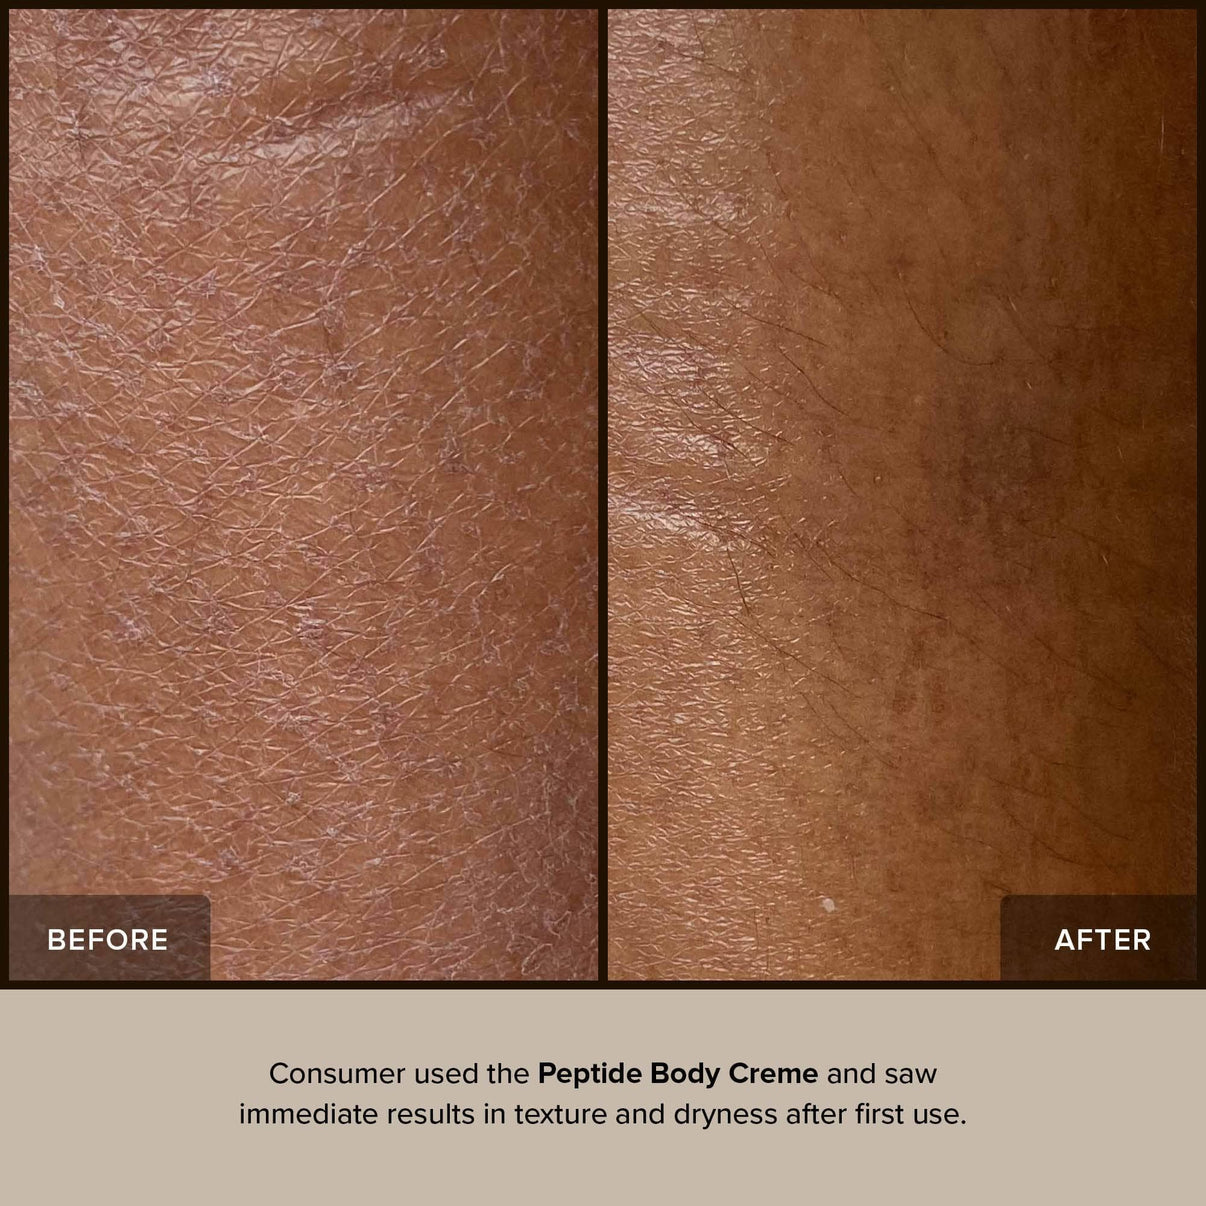 Before and after using Peptide body creme